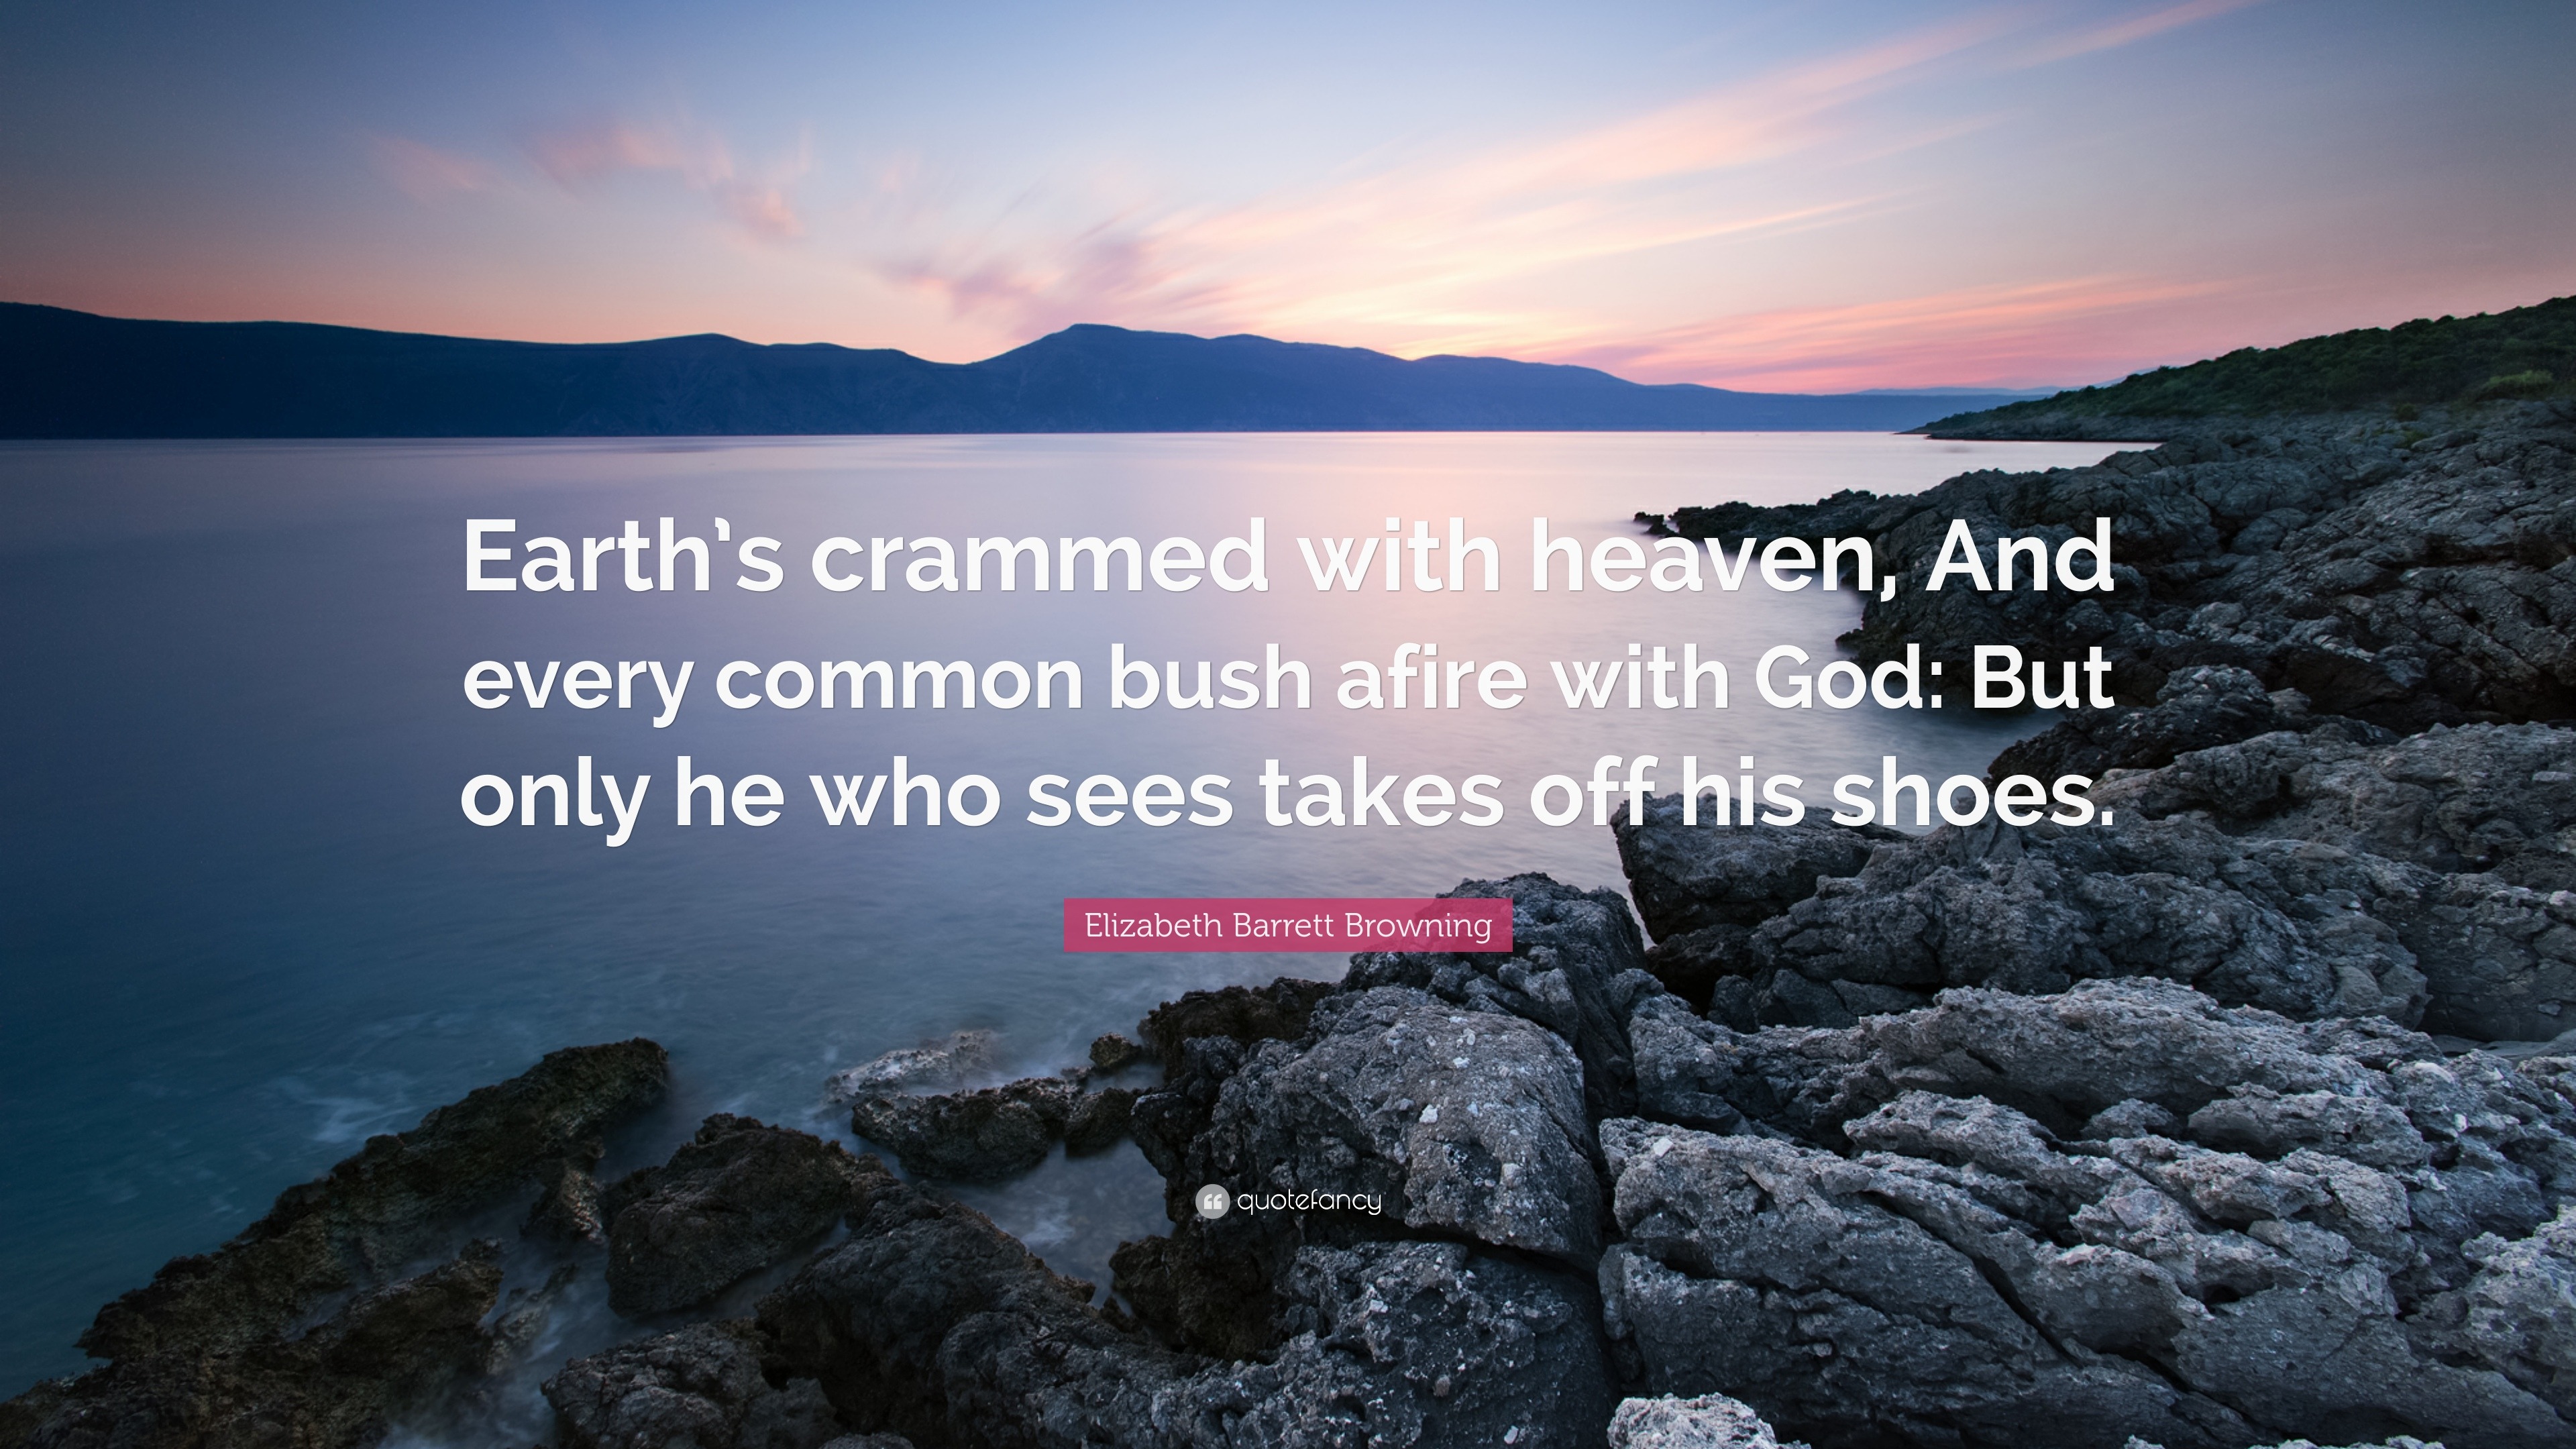 Elizabeth Barrett Browning Quote: “Earth’s crammed with heaven, And every common ...